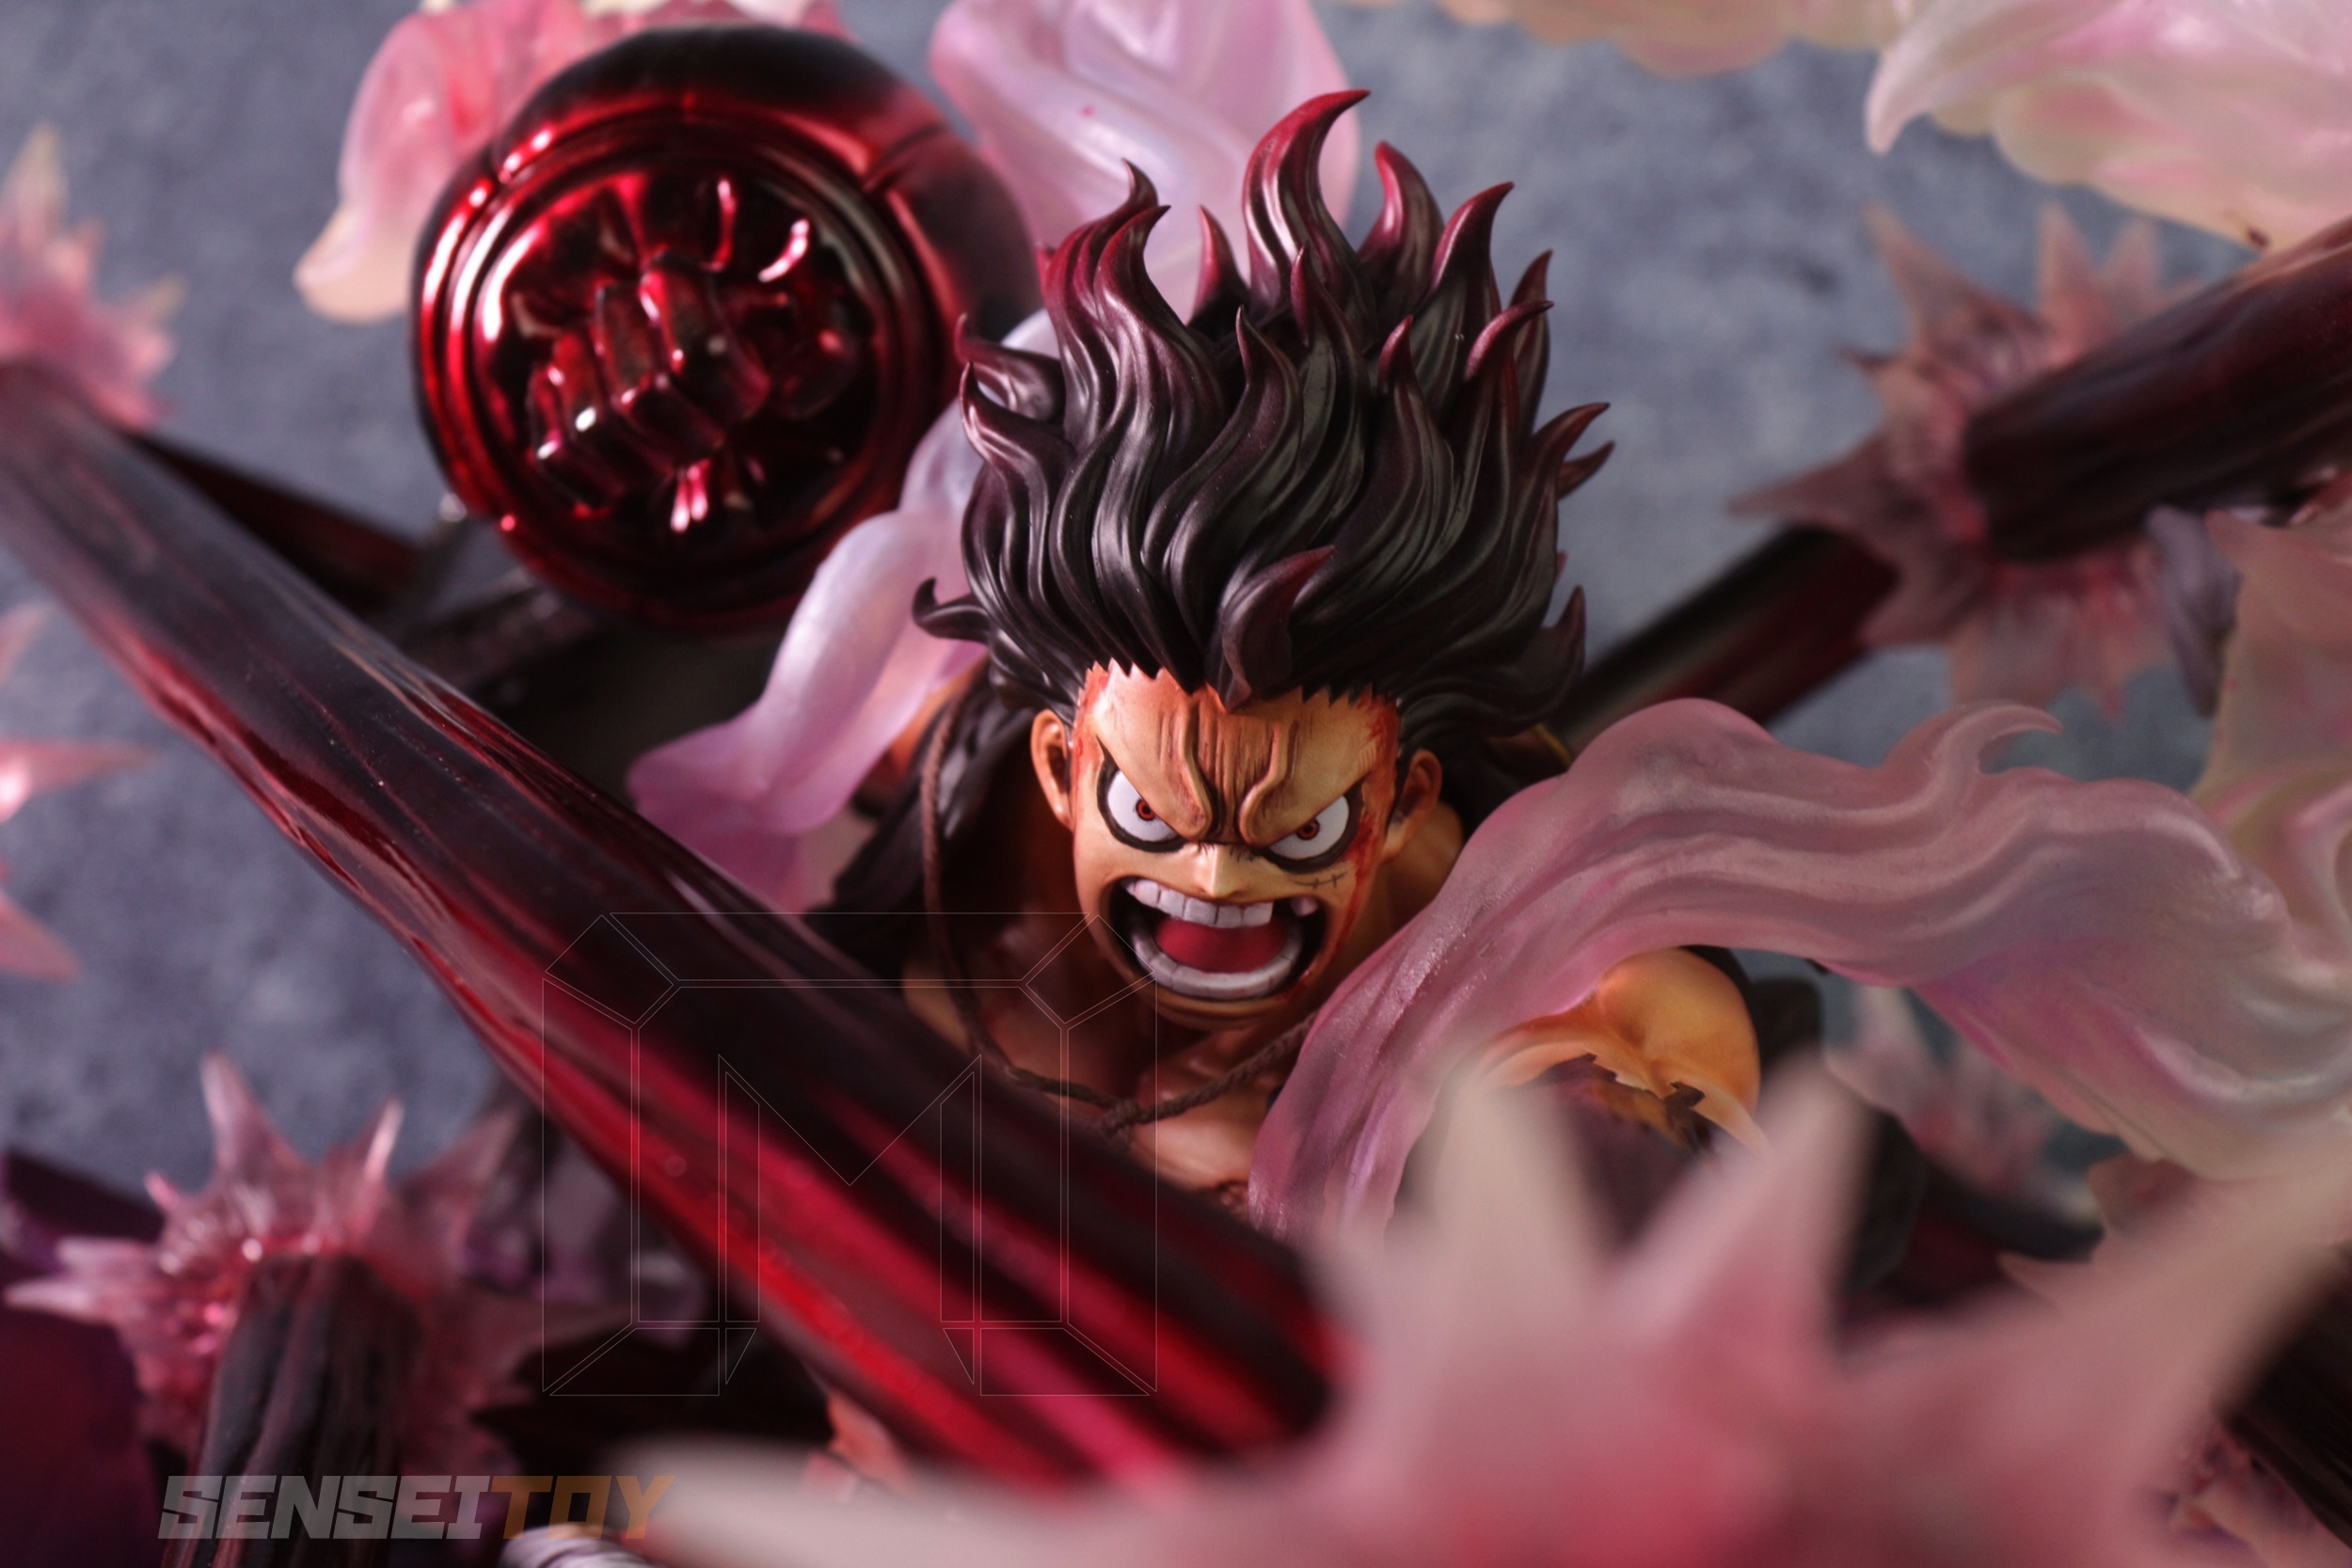 Gear 4th Snakeman Wallpaper 28 Book Source For Free Download HD, 4K & High Quality Wallpaper